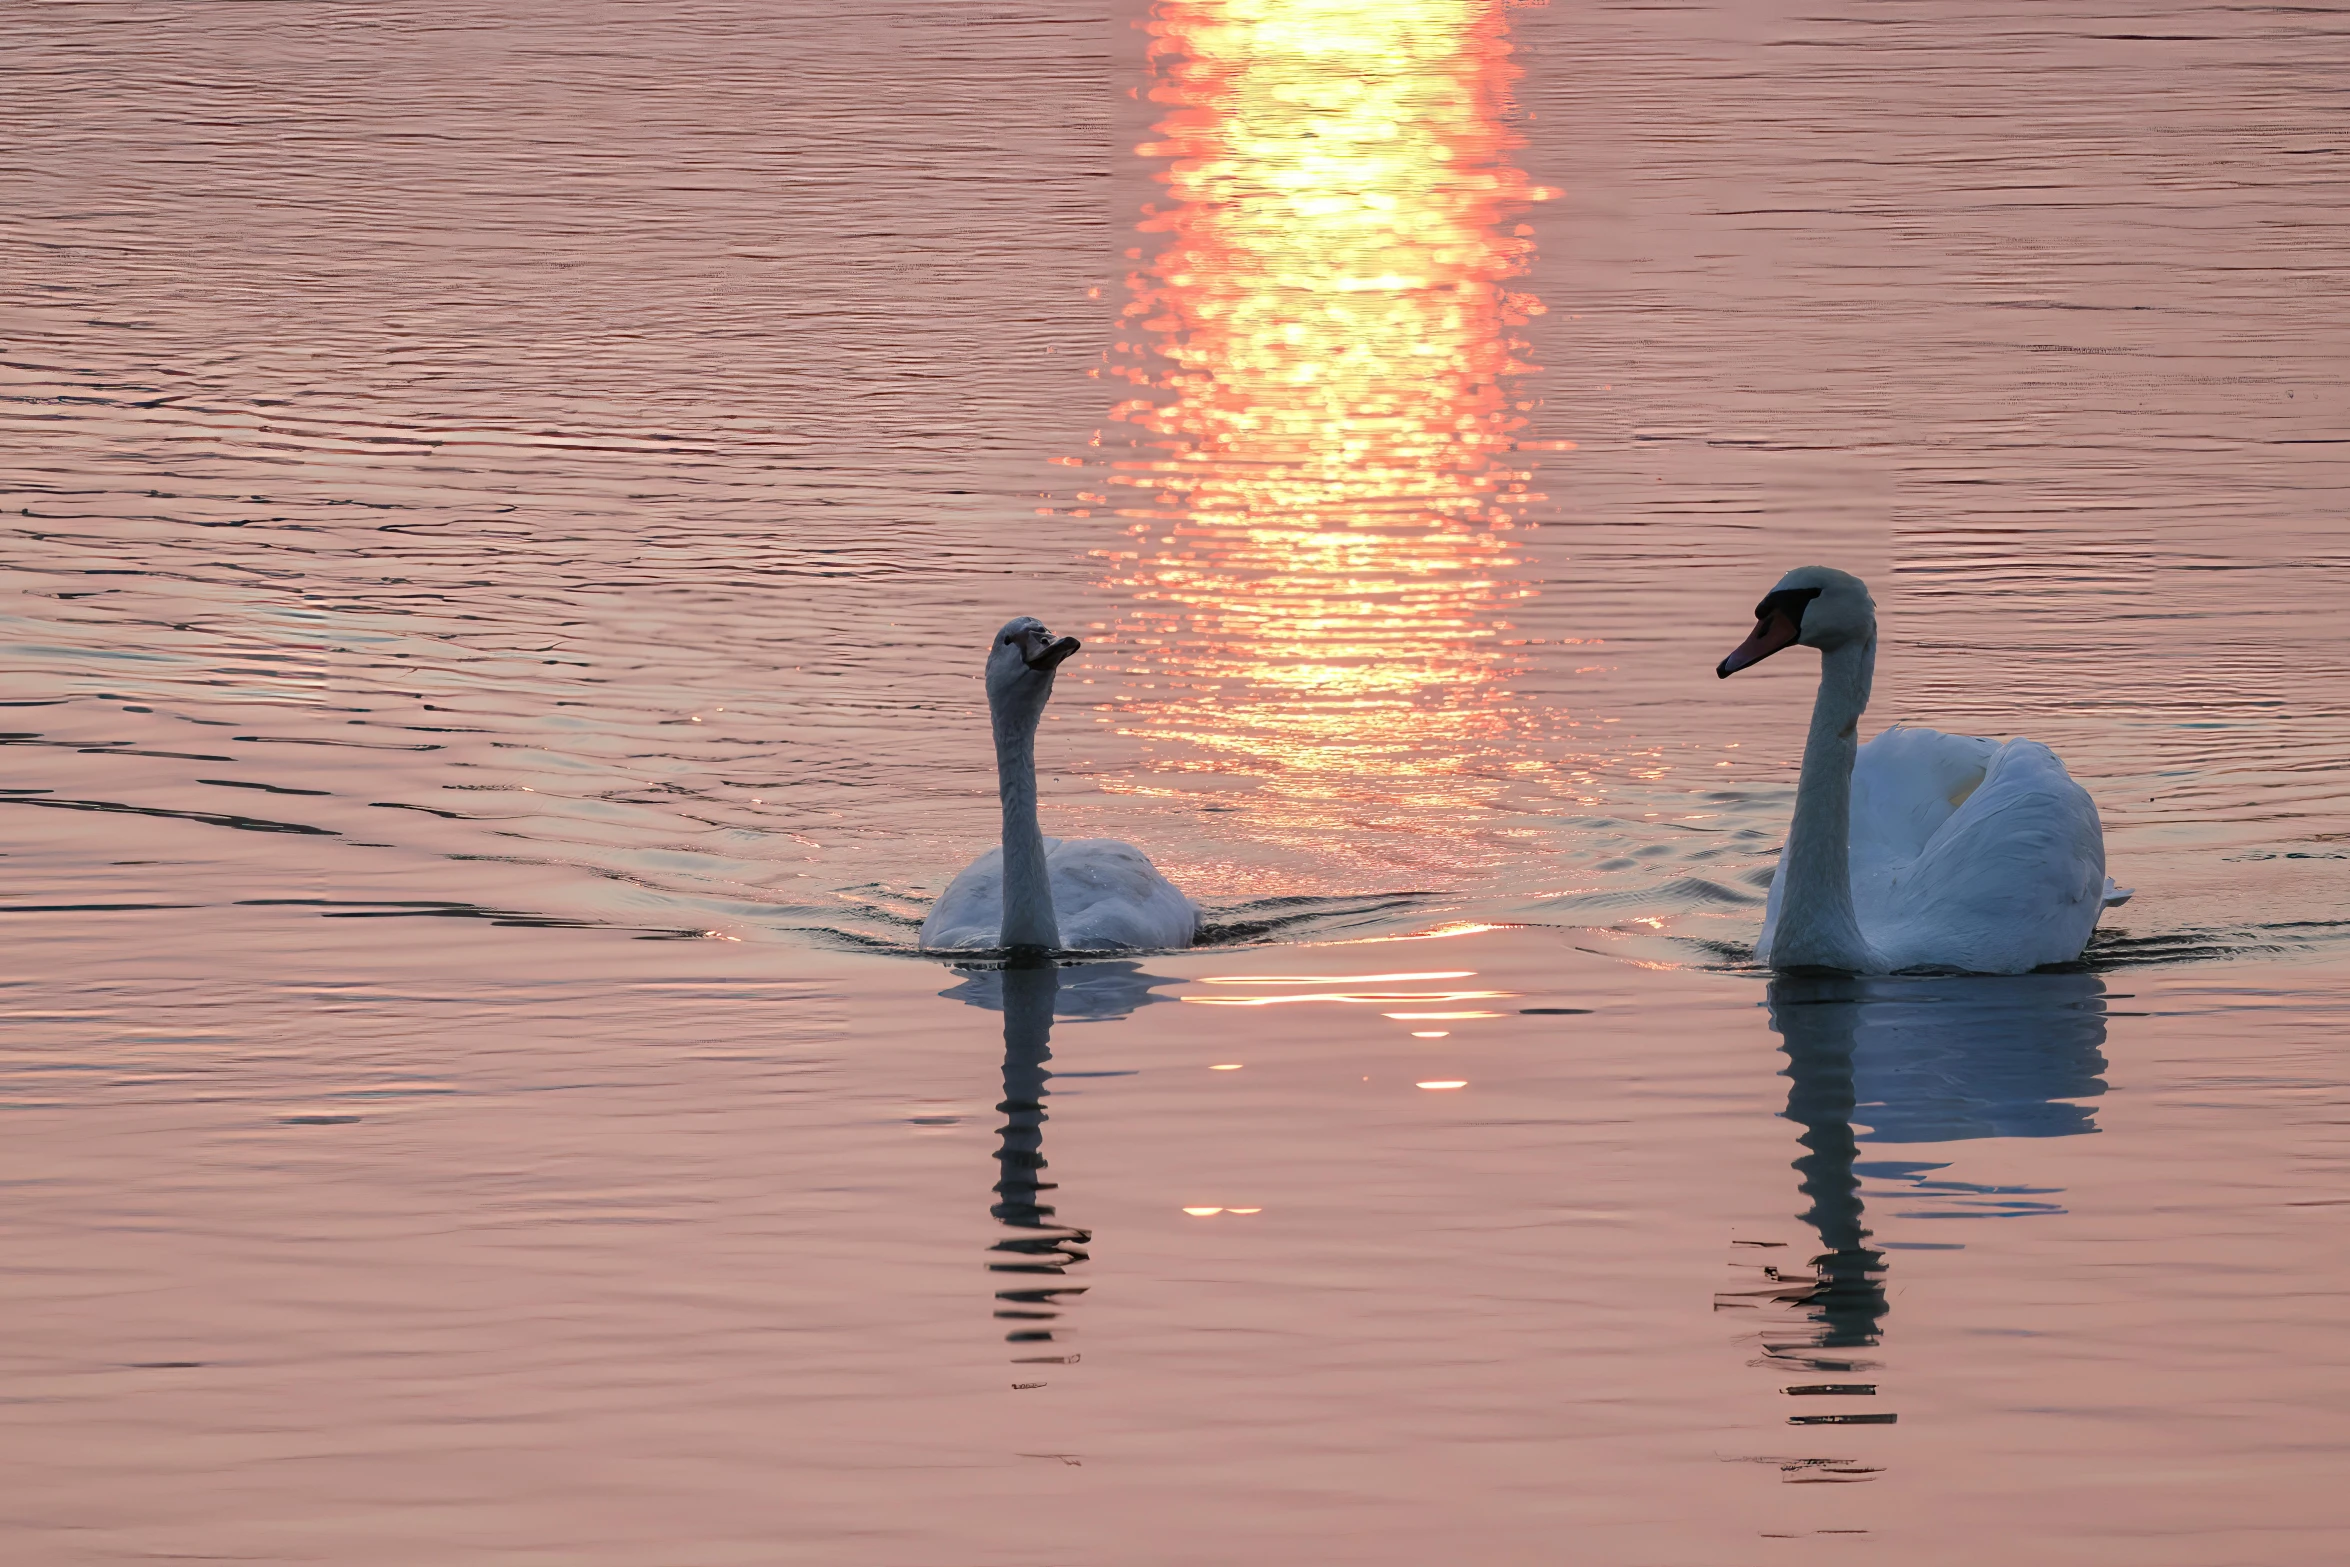 two white swans are swimming on a body of water